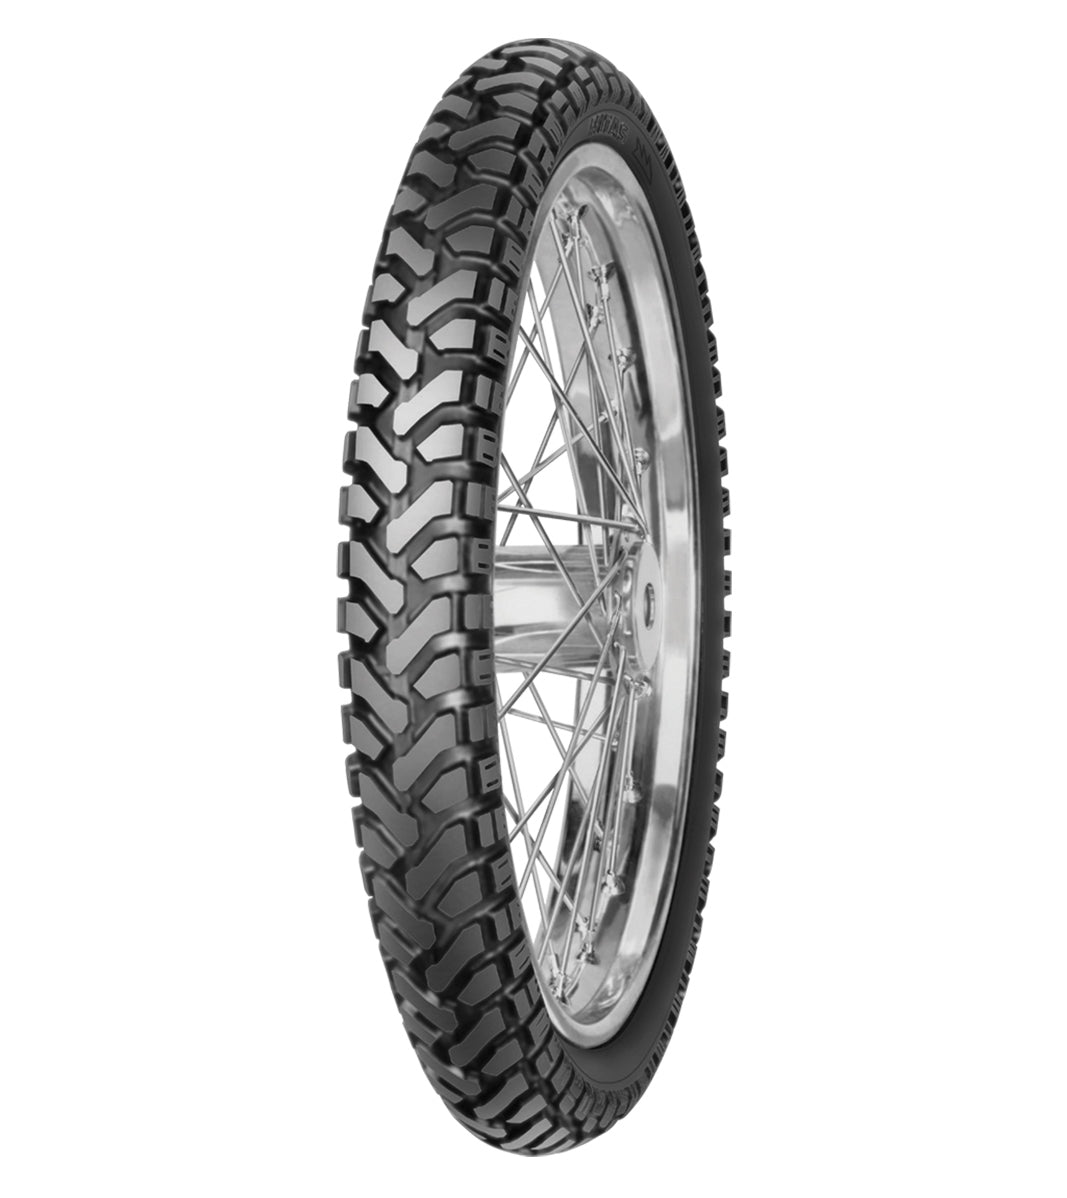 Mitas E-07 ENDURO 90/90-21 Trail OFF Trail 54T No Stripe Tubeless Front Tire, 224636, 90/90-21, Adventure Touring, E Series, E-07 Enduro, Front, Trail, Trail OFF, Tires - Imported and distributed in North & South America by Lindeco Genuine Powersports - Premier Powersports Equipment and Accessories for Motorcycle Enthusiasts, Professional Riders and Dealers.